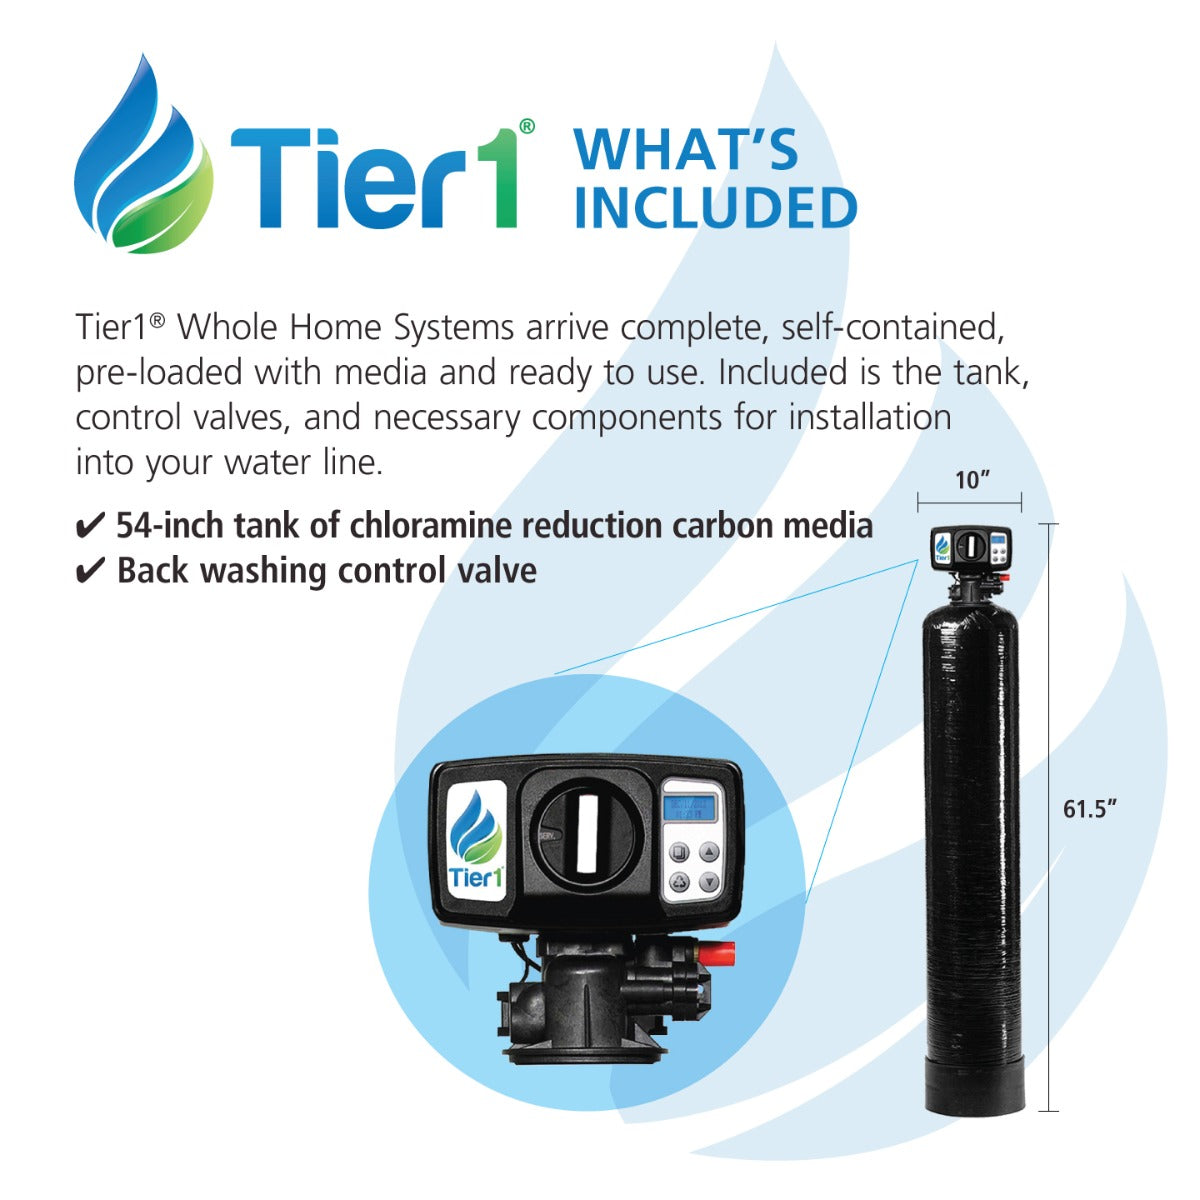 Precision Series Tier1 Whole House Water Filtration System for Chloramine and Chlorine, Taste & Odor Reduction for 4 - 6 Bathrooms